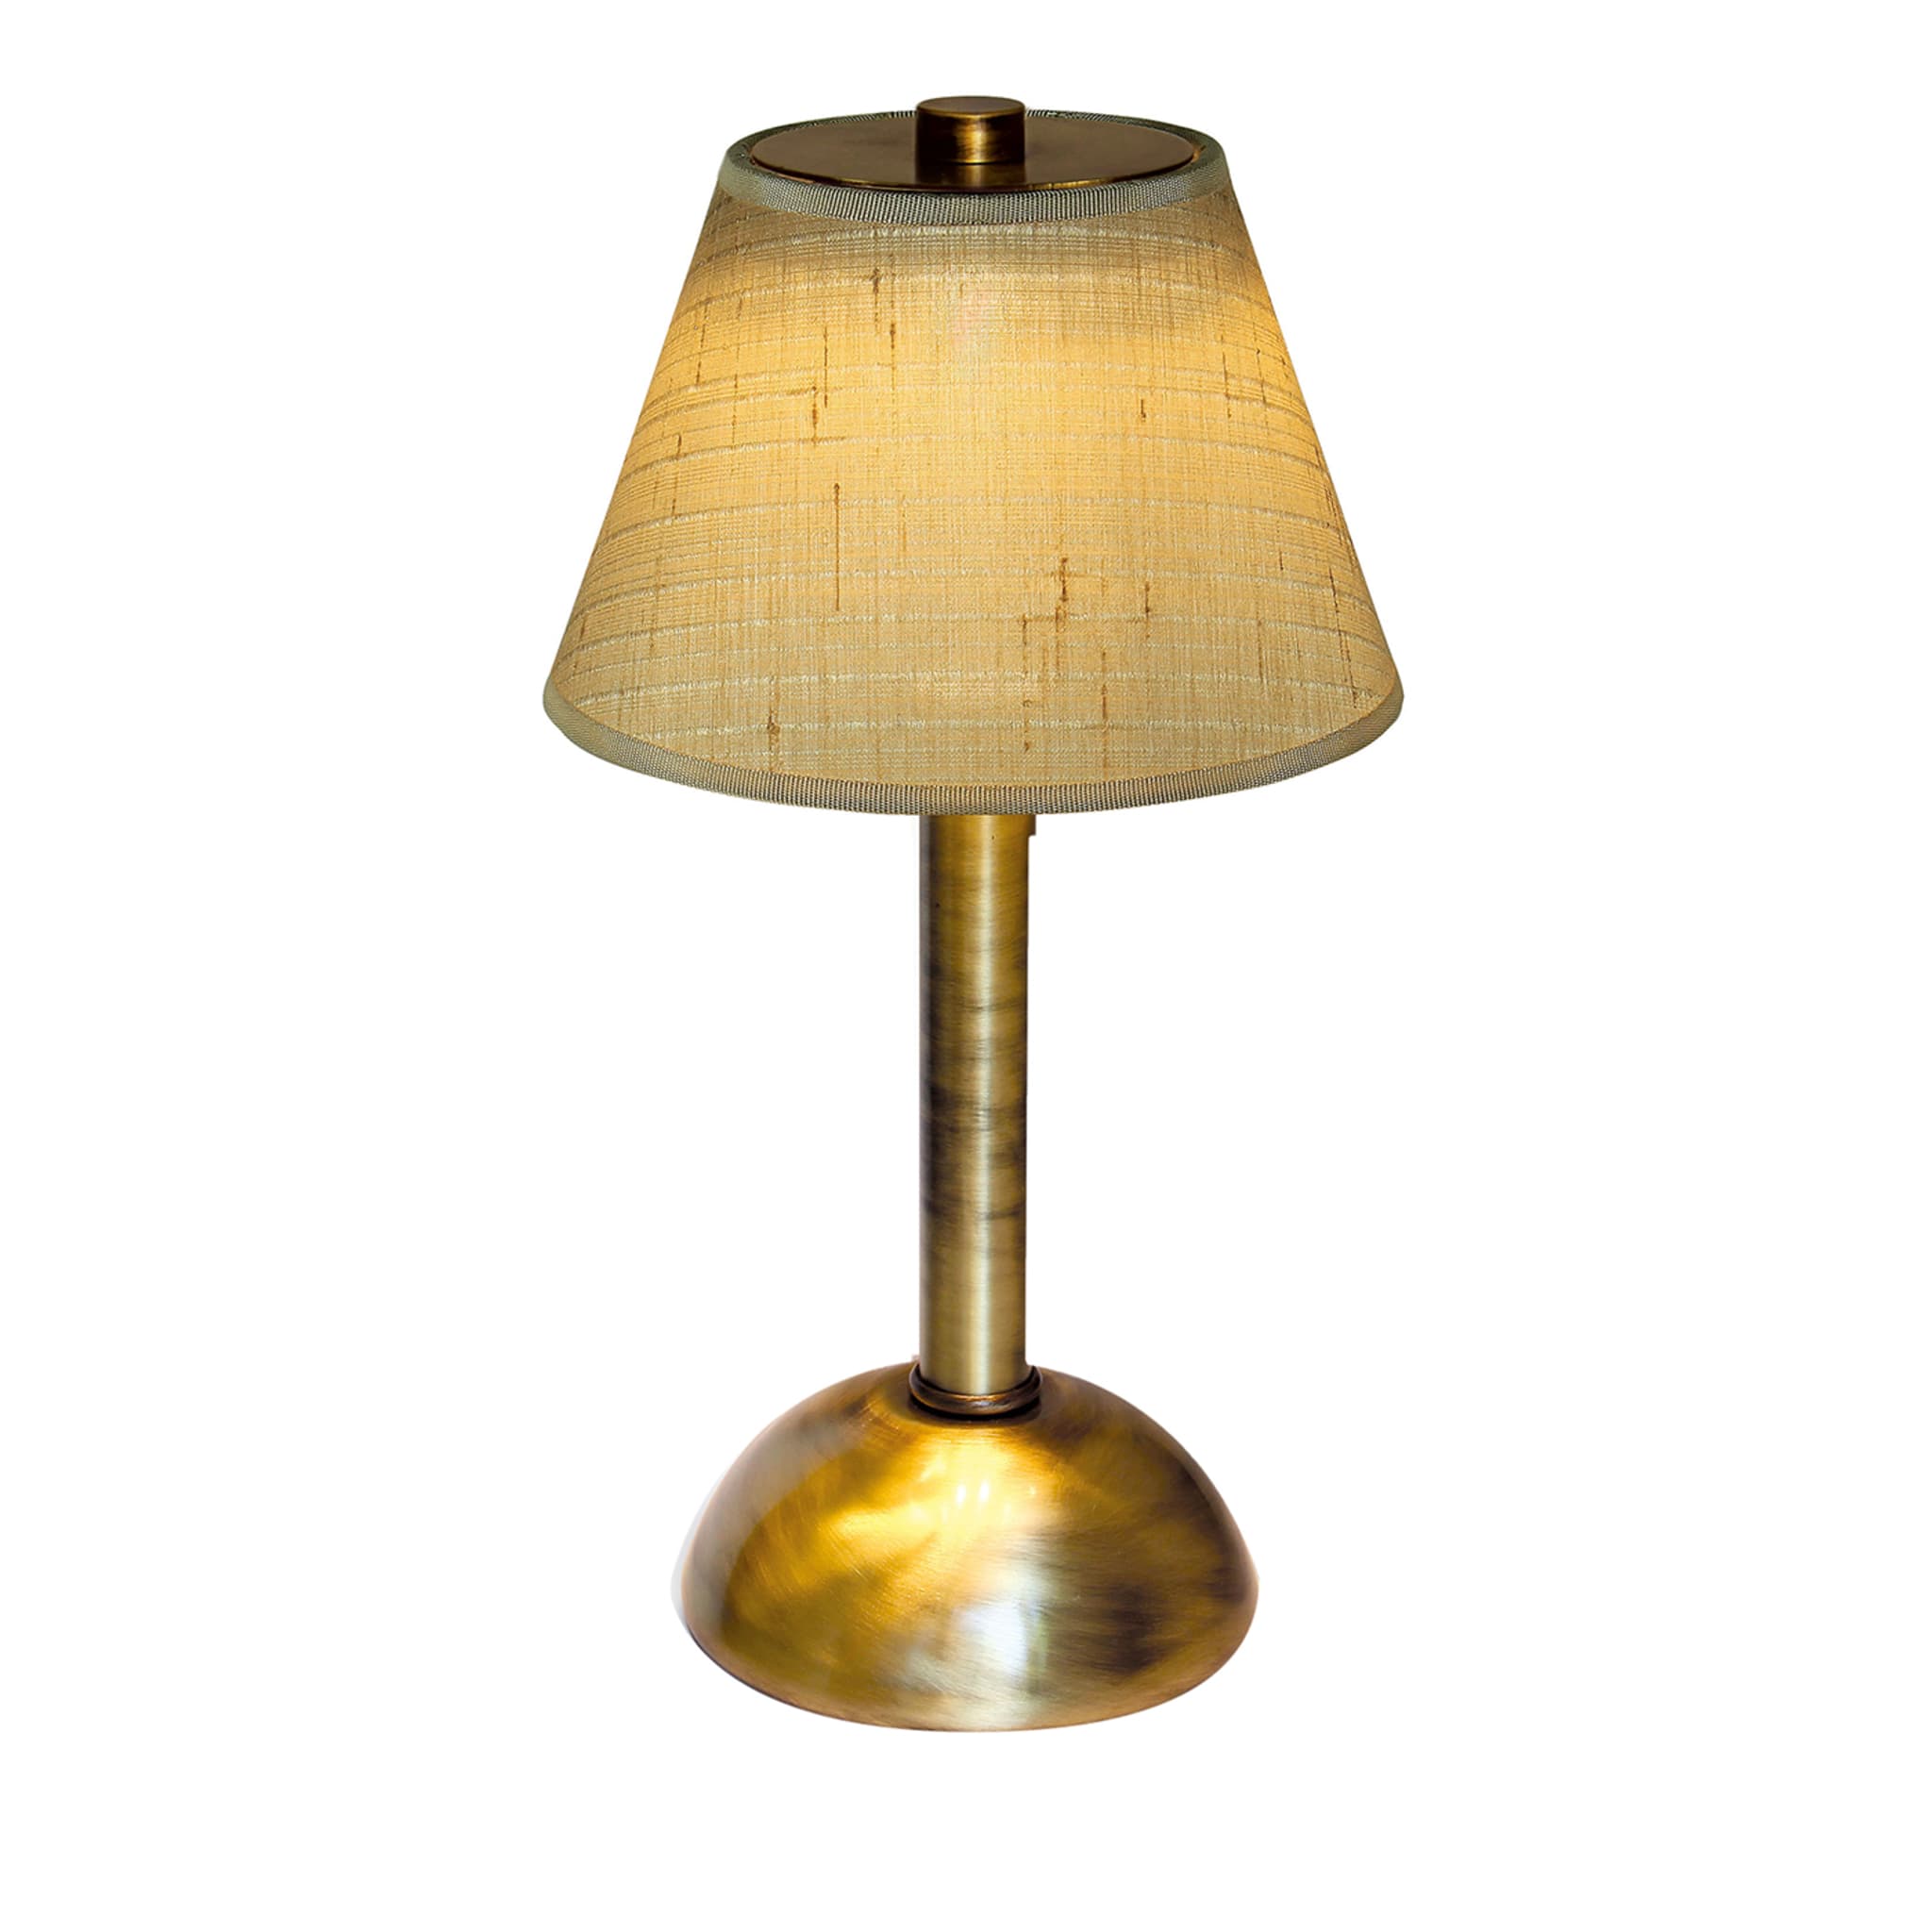 Moon Soria Avorio Brushed Bronze Table Lamp by Stefano Tabarin - Main view